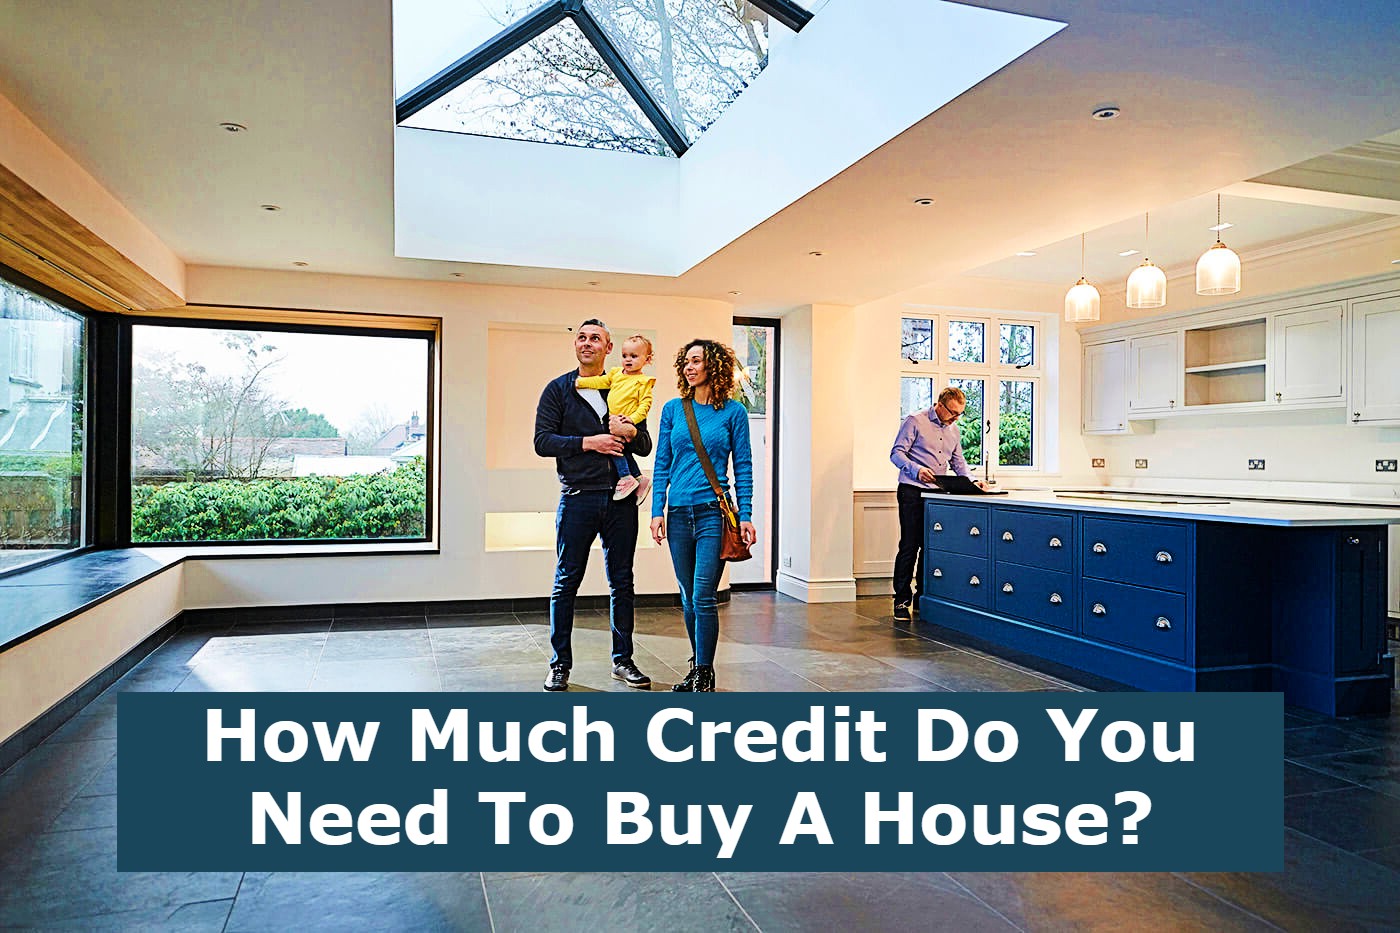 How Much Credit Do You Need To Buy A House?